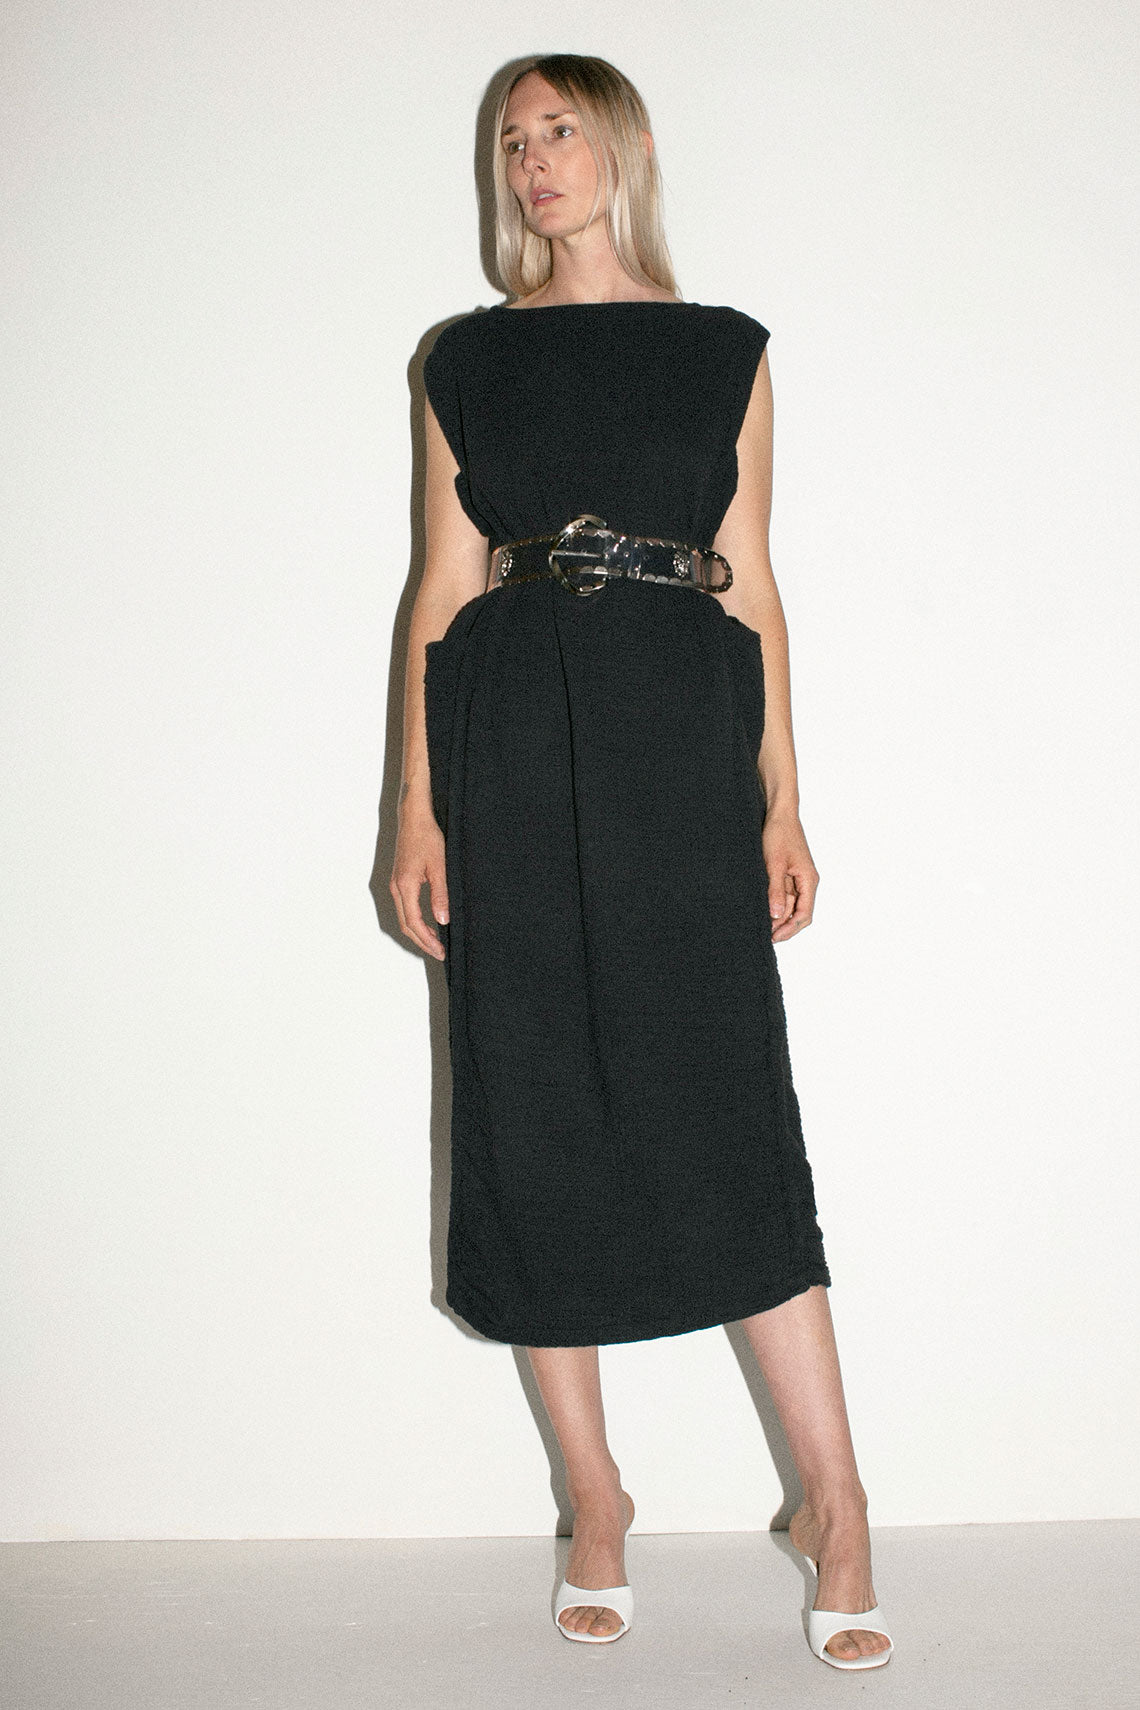 Graphite Side Corded Dress